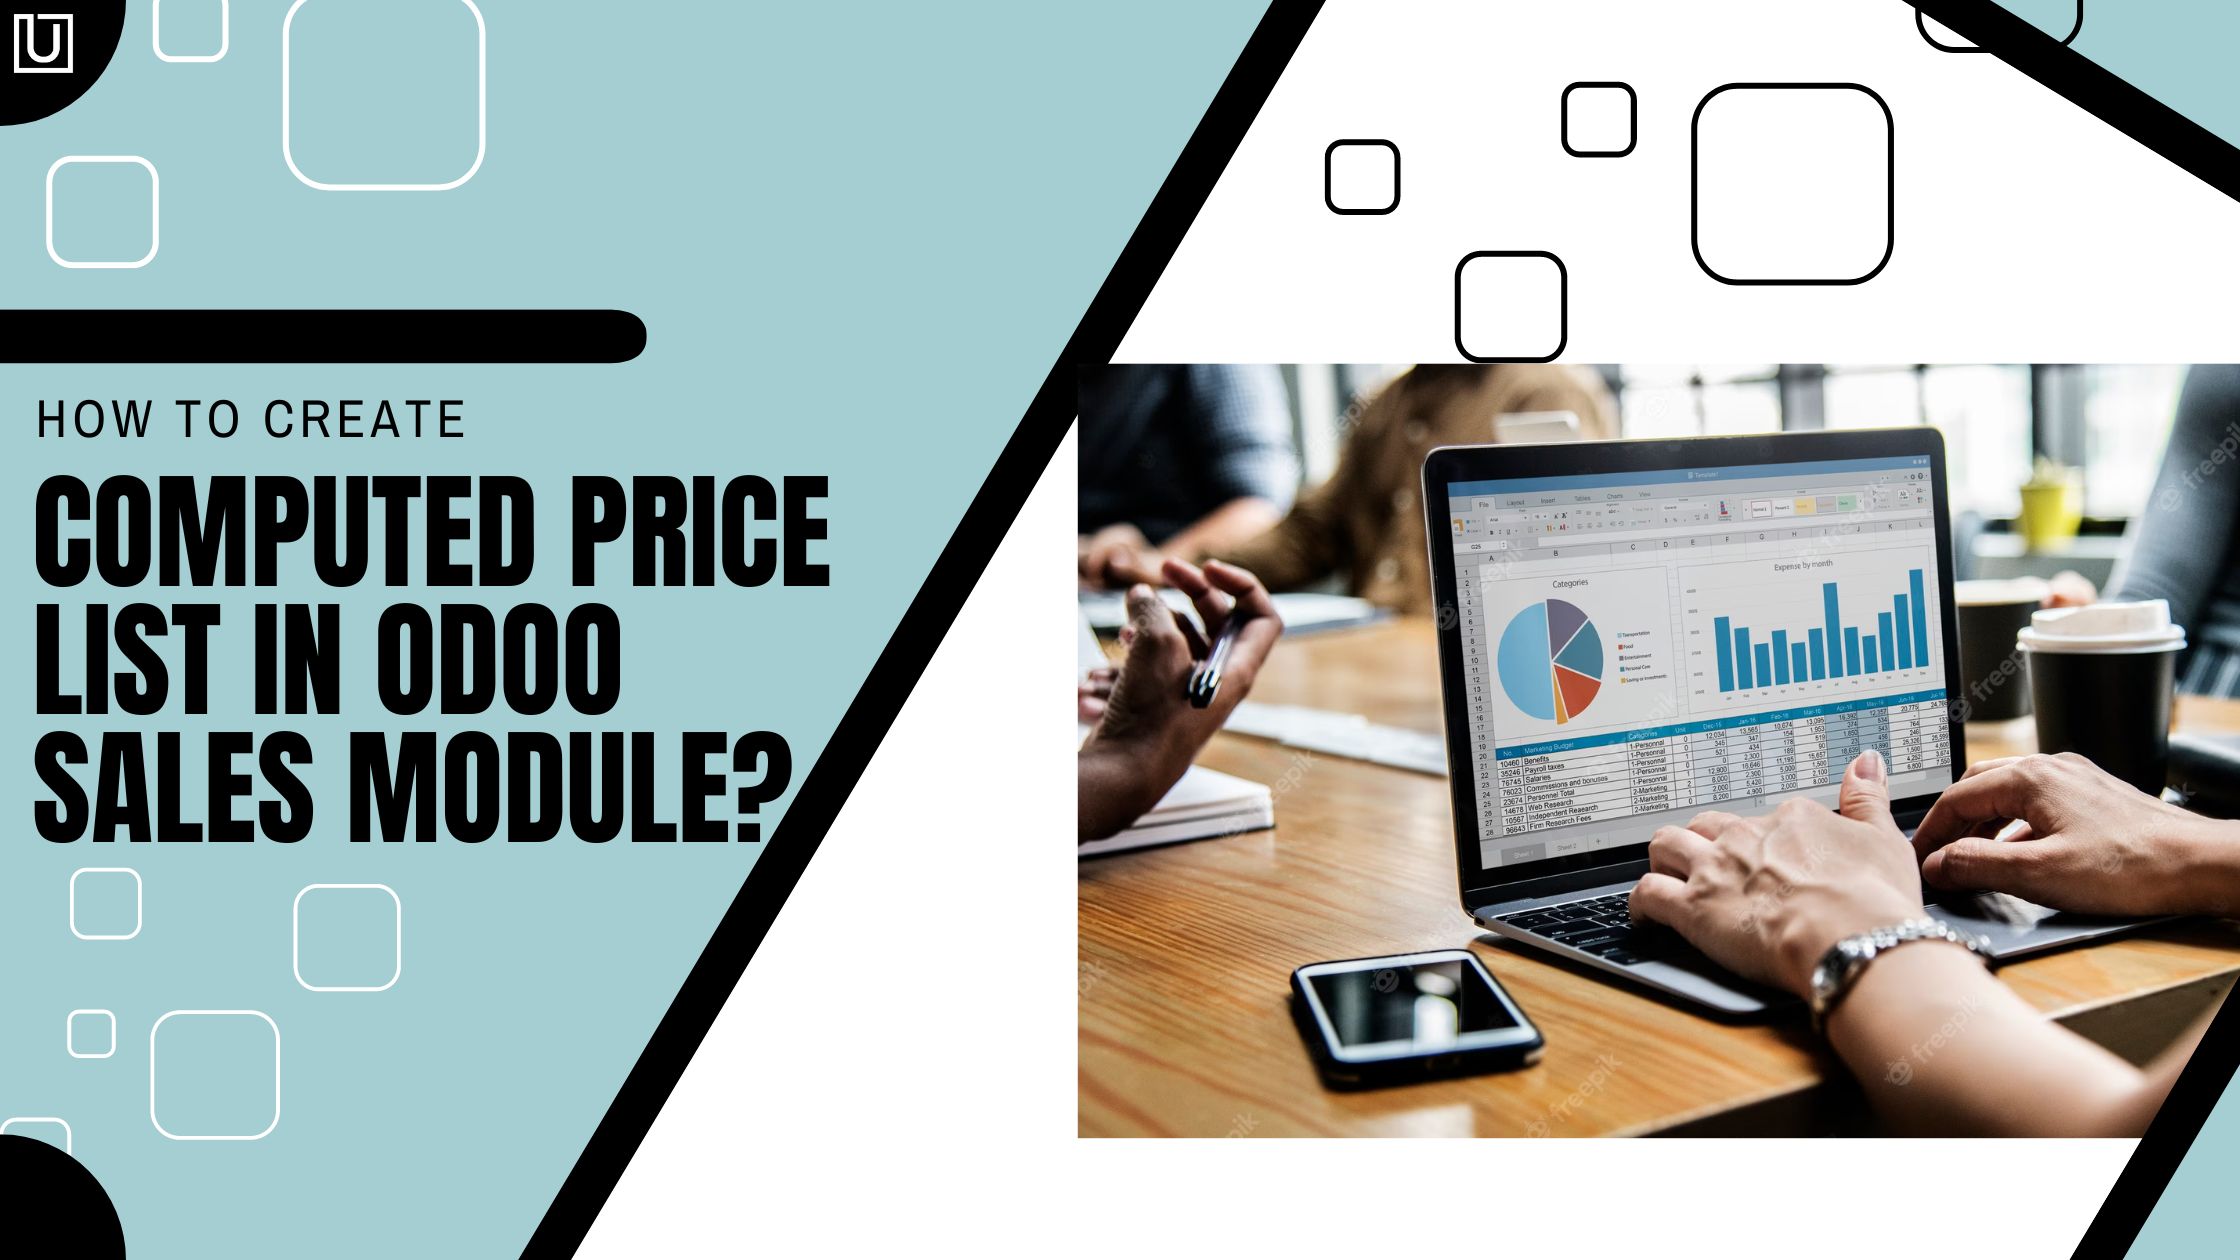 How to Create Computed Price List in Odoo Sales Module